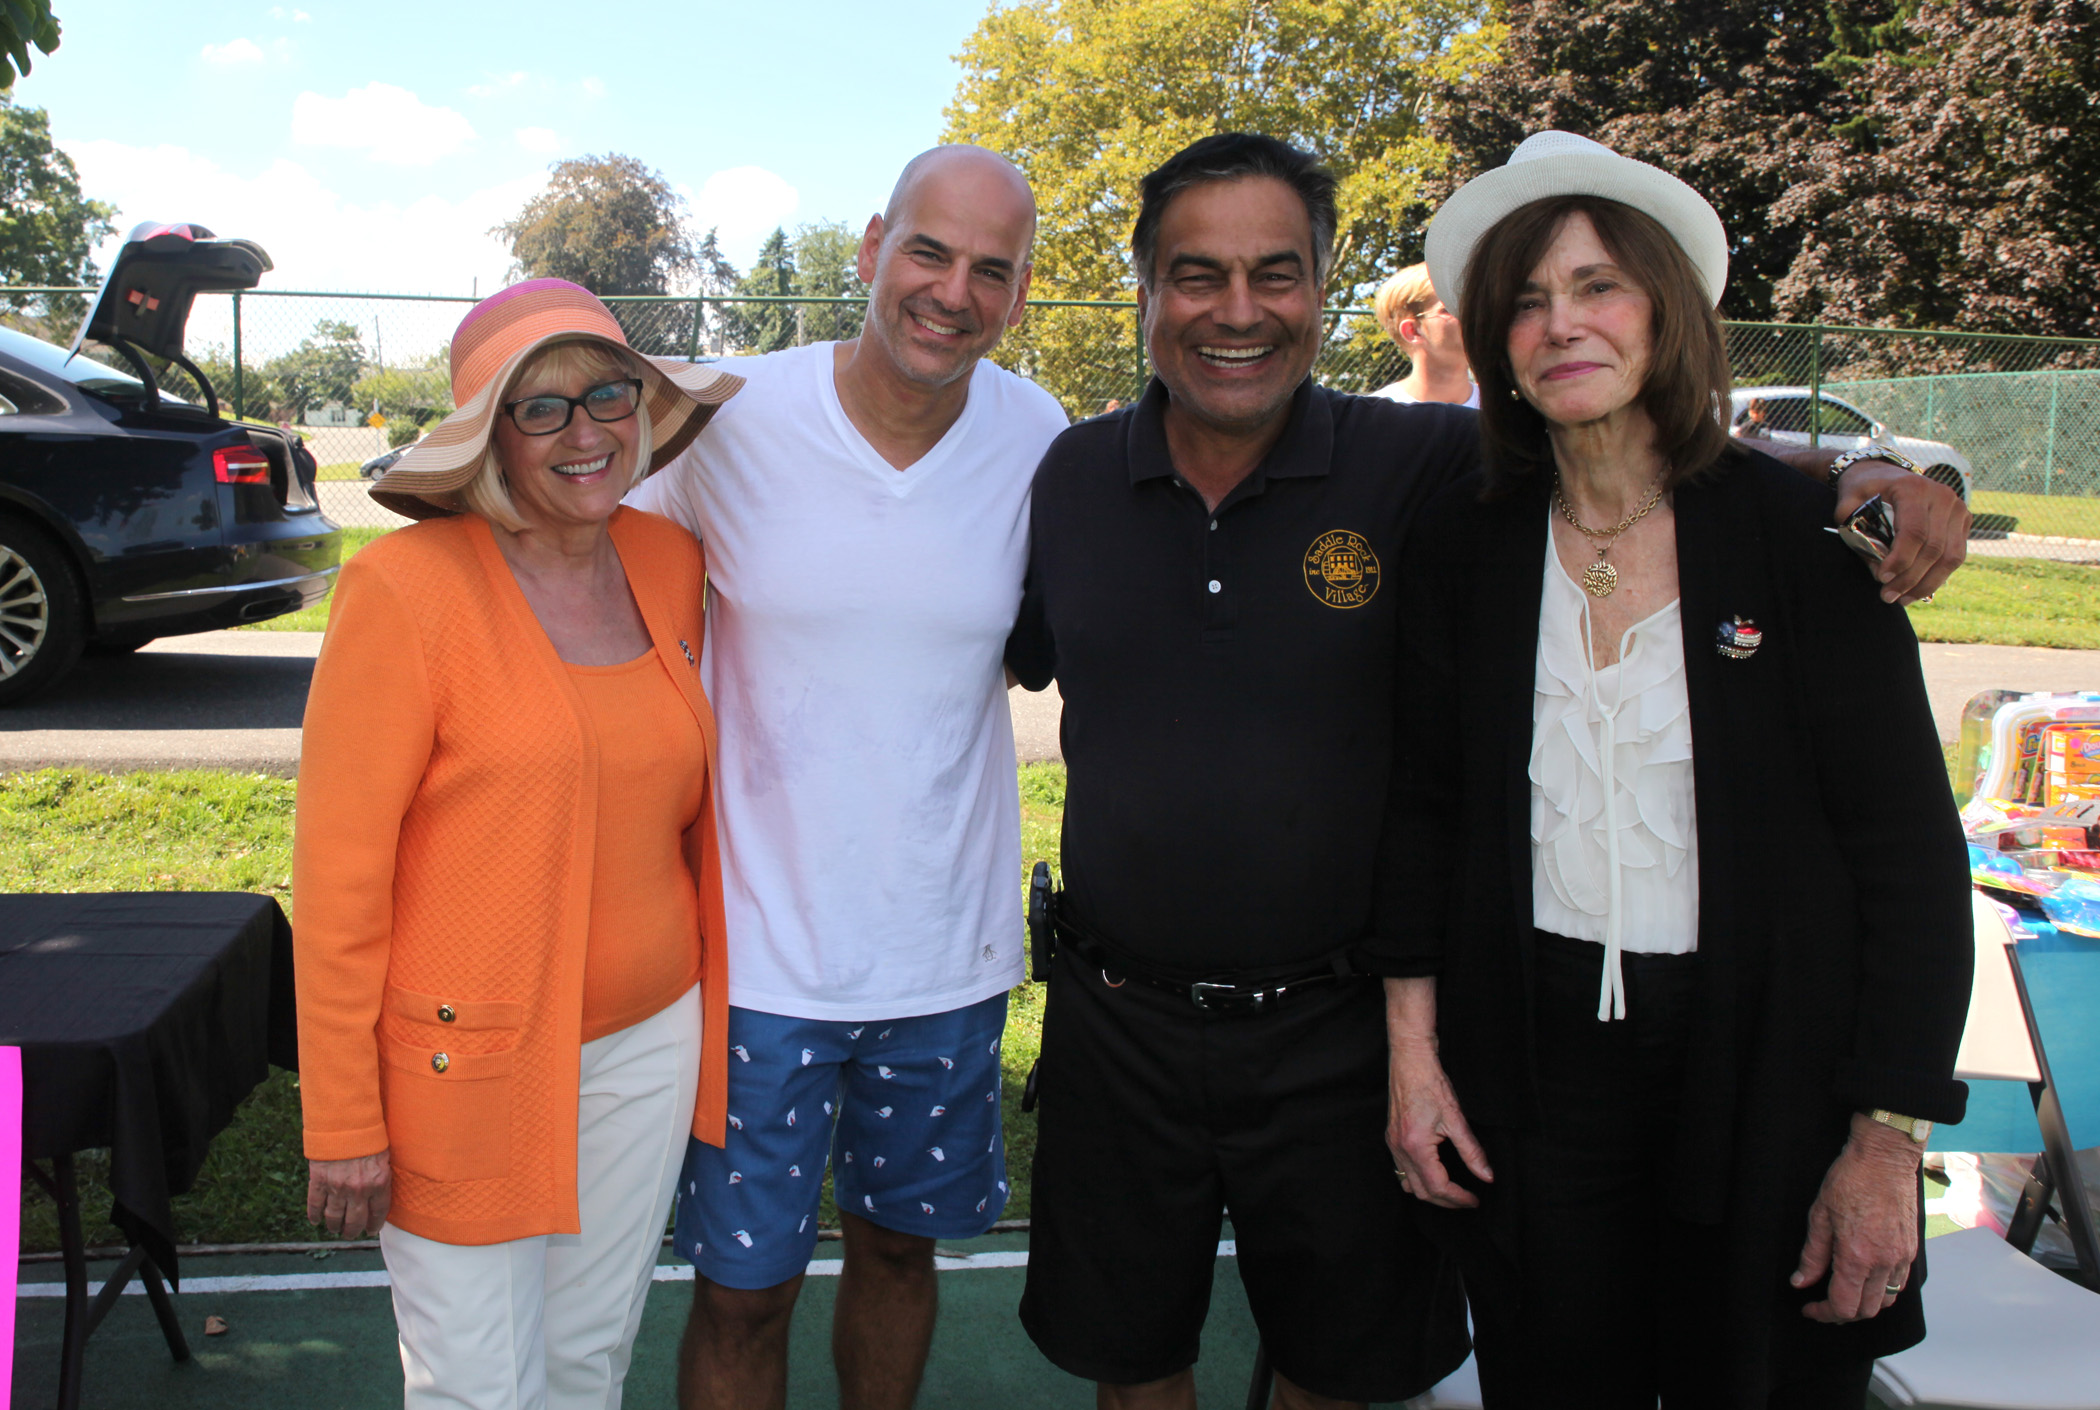 Supervisor Judi Bosworth, Ronny Ben Josef, Saddle Rock Mayor Dan Levy and Council Member Lee Seeman at the annual Family Fun Day. (Photo courtesy of the Town of North Hempstead)